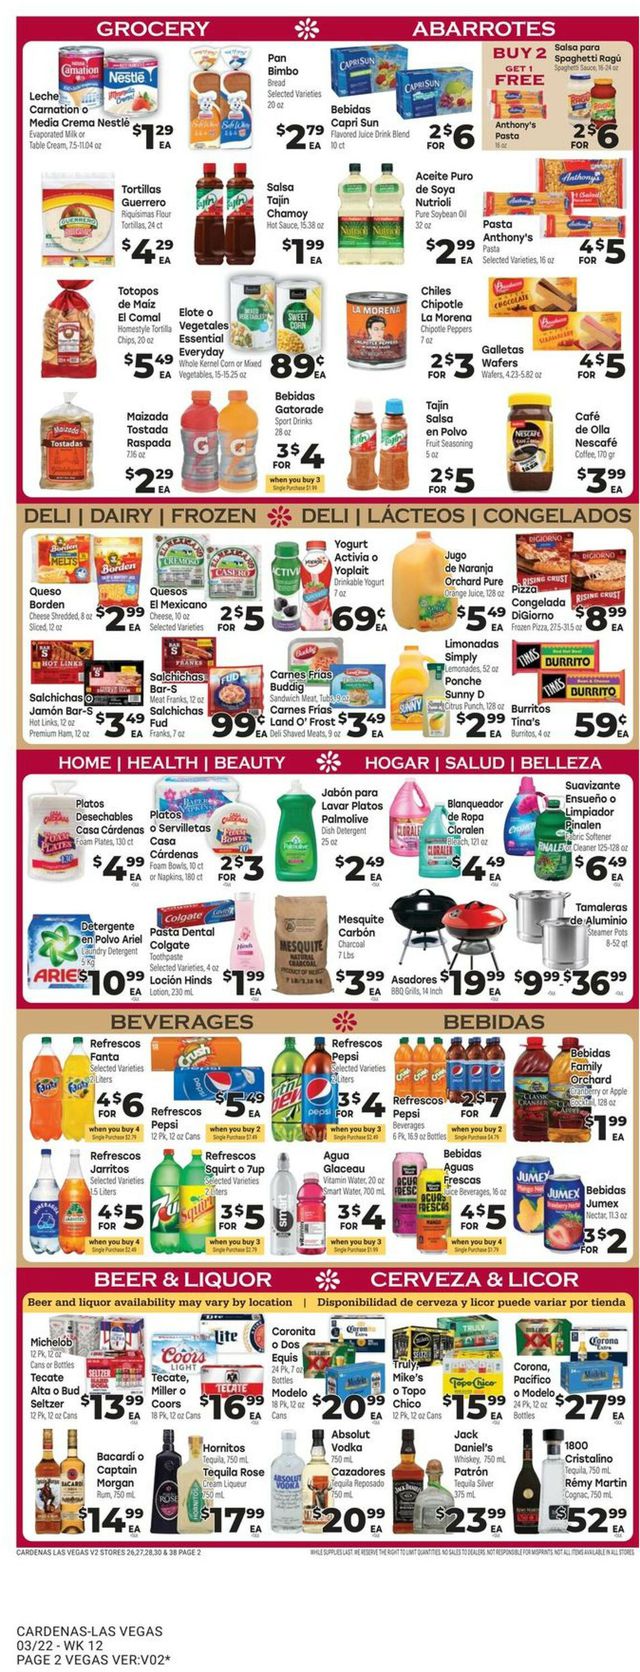 Cardenas Ad from 03/22/2023